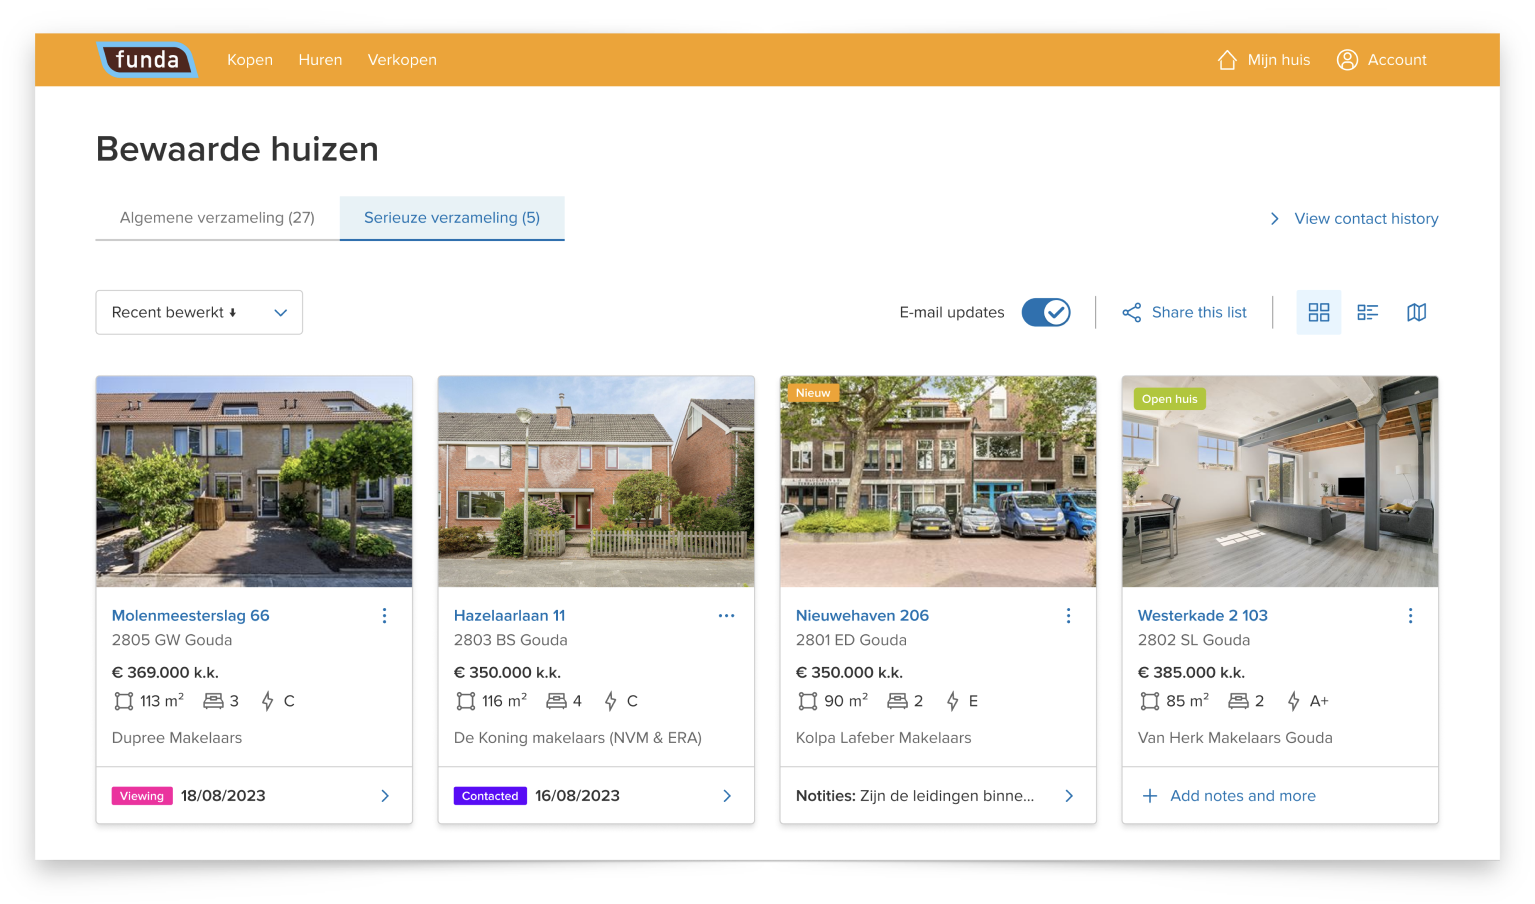 A screenshot of the new dashboard-style design for the Saved Houses feature on the housing platform: funda.